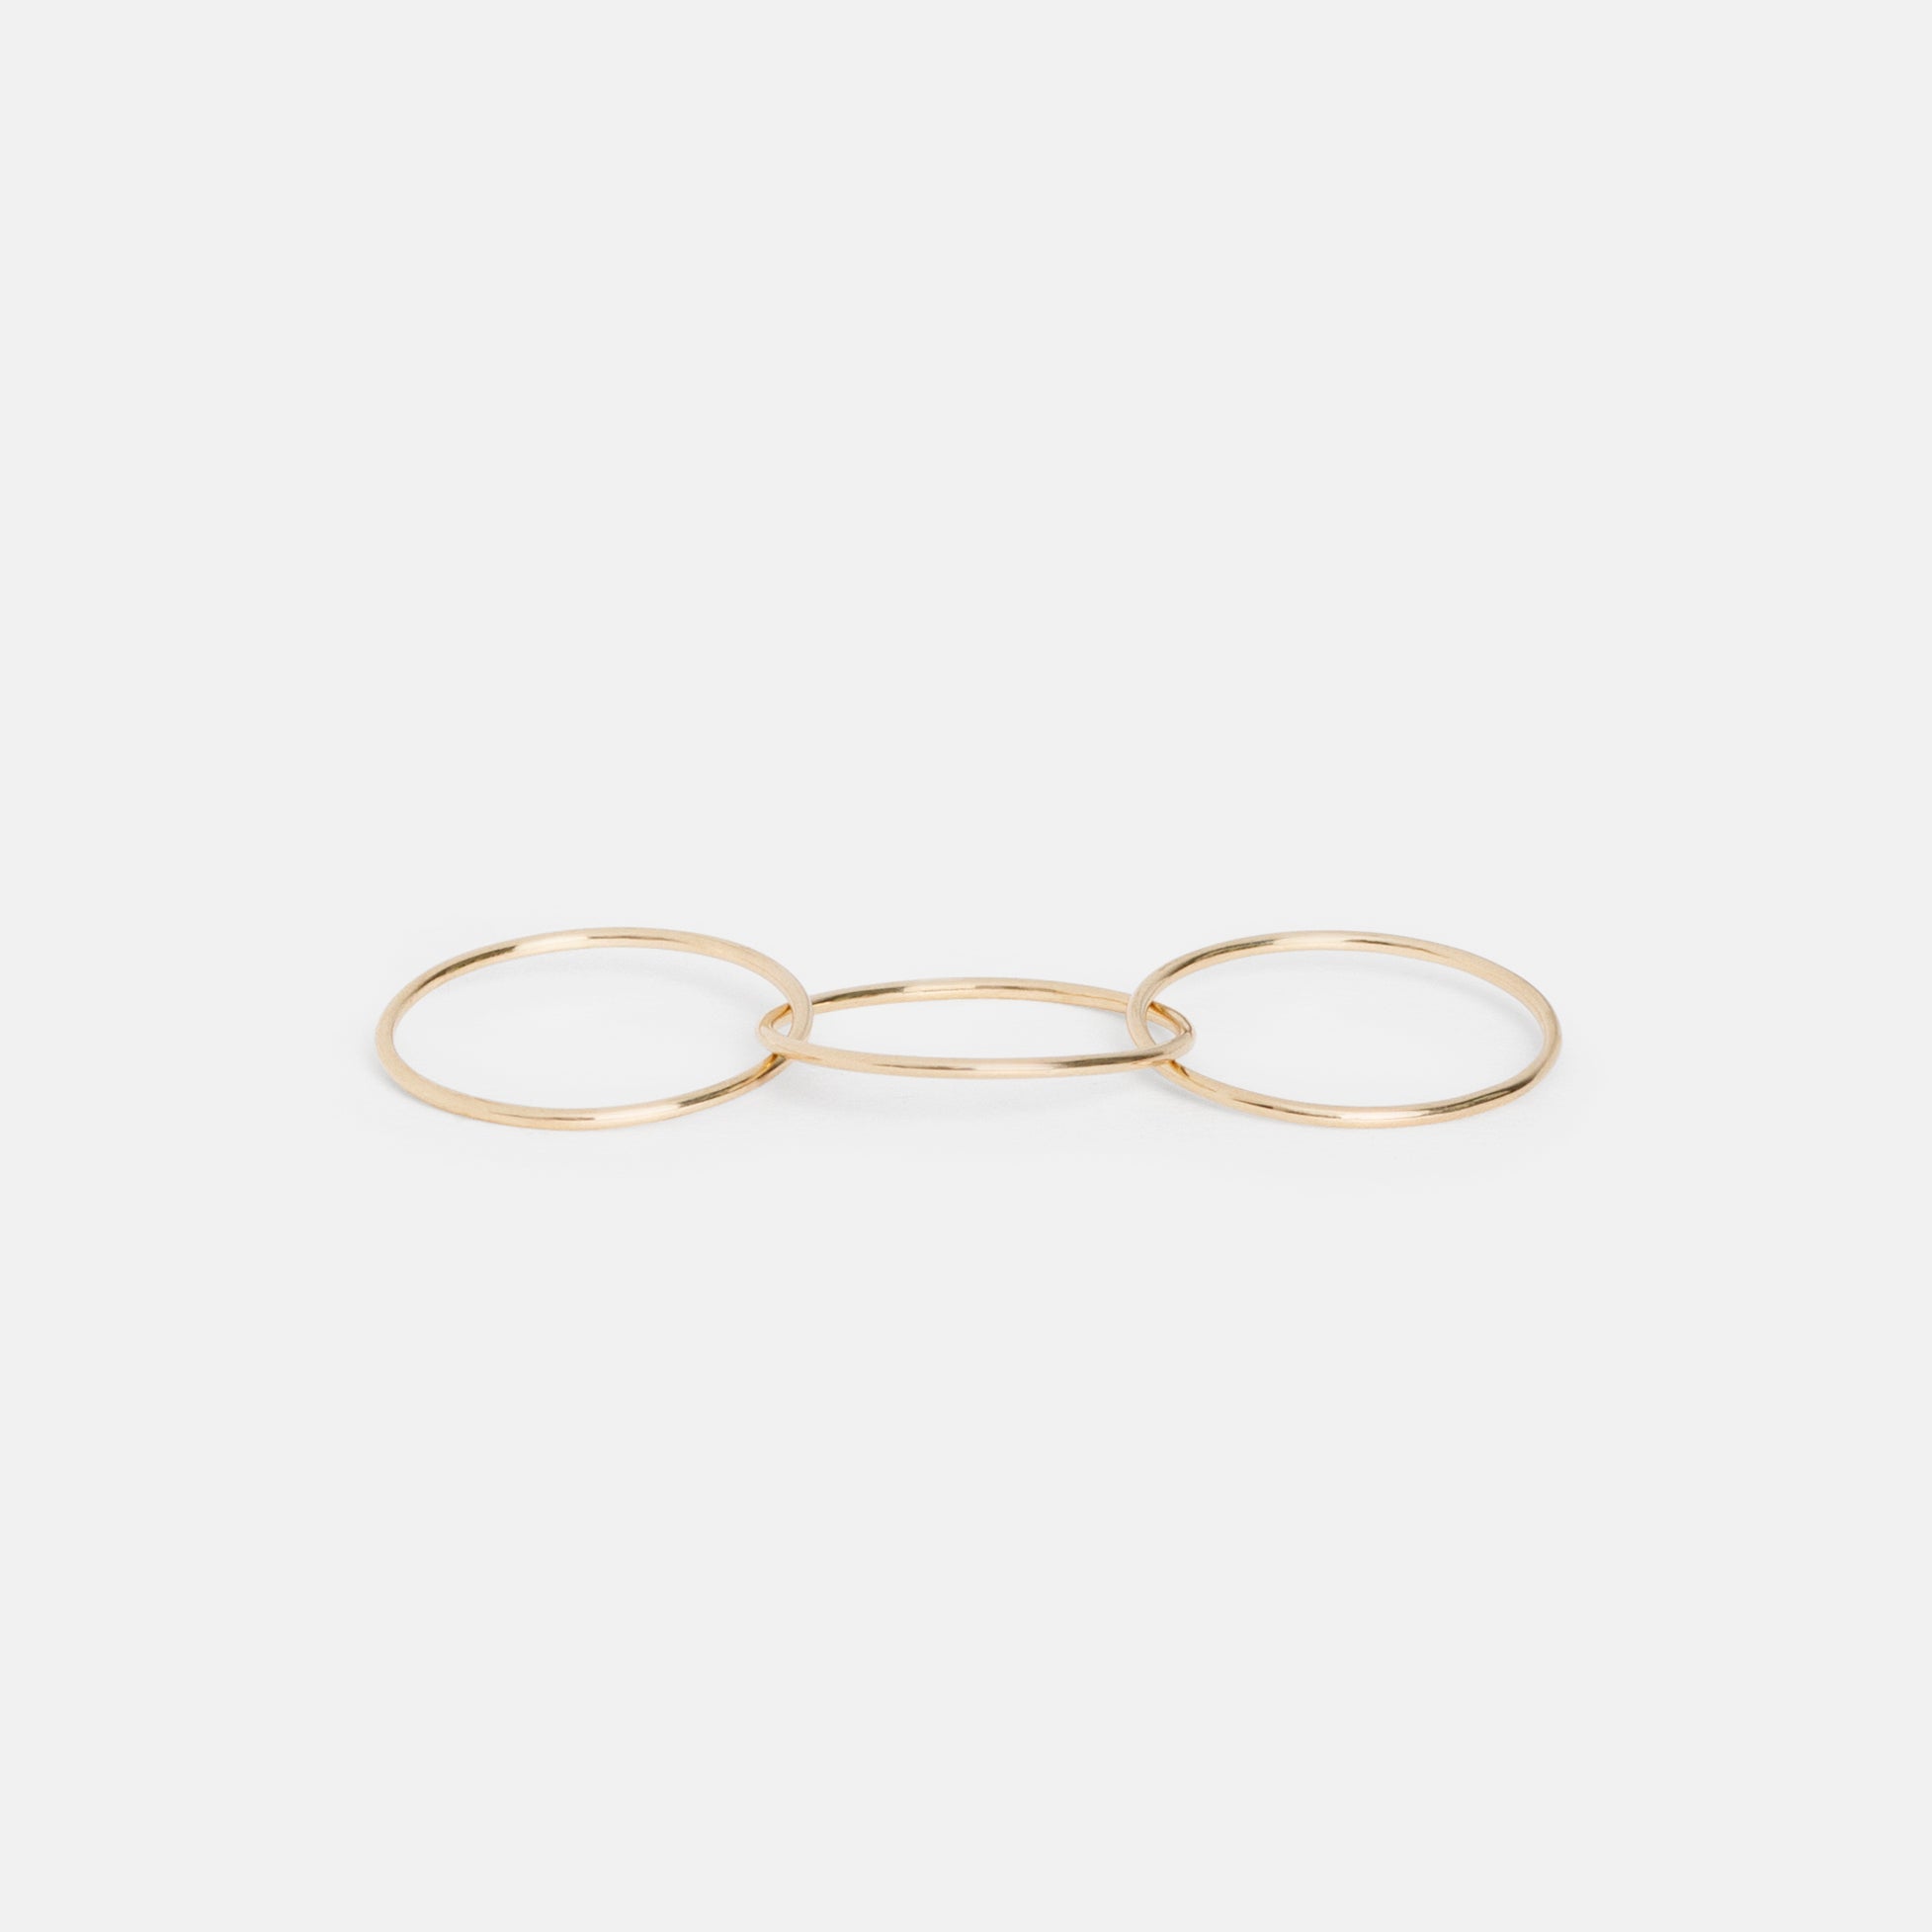 Link Designer Ring in 14k Gold by SHW Fine Jewelry